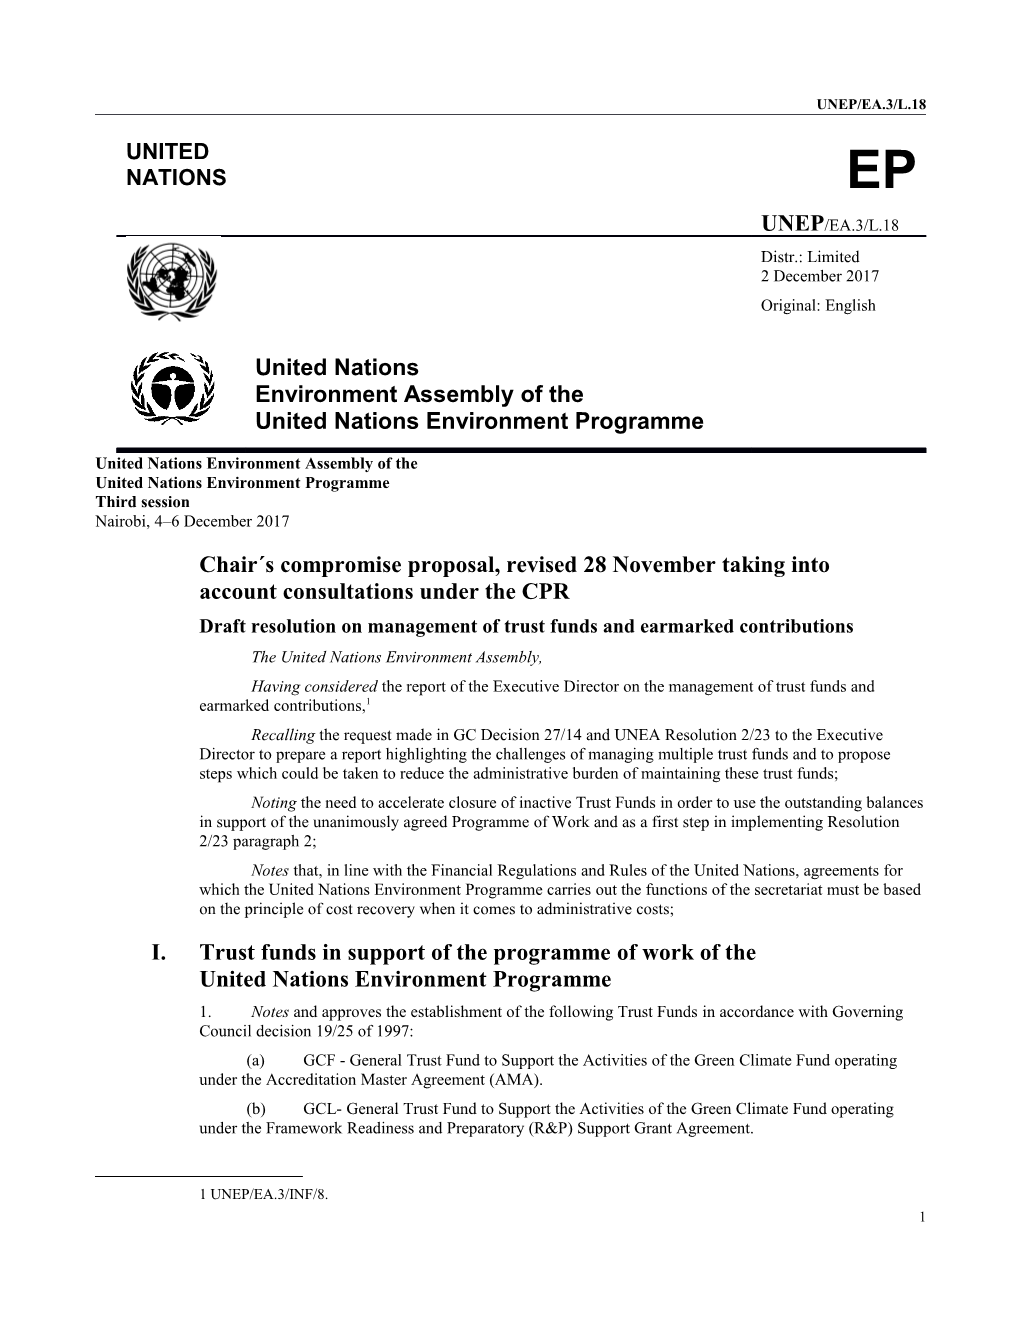 United Nations Environment Assembly of the United Nations Environment Programme